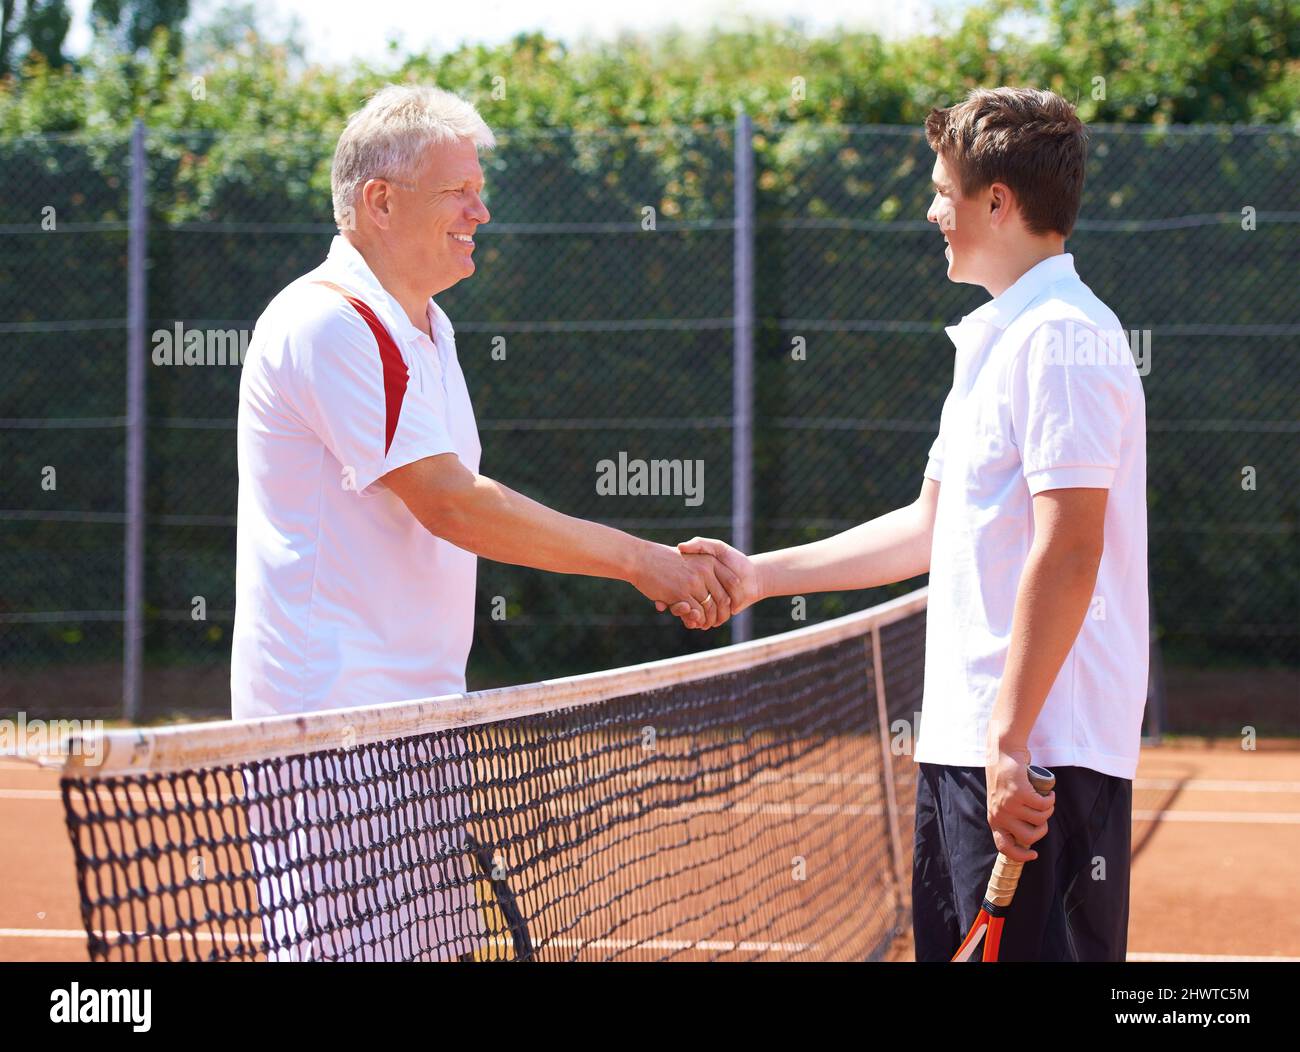 Good game son. A father and son shaking hands after a friendly game of tennis. Stock Photo